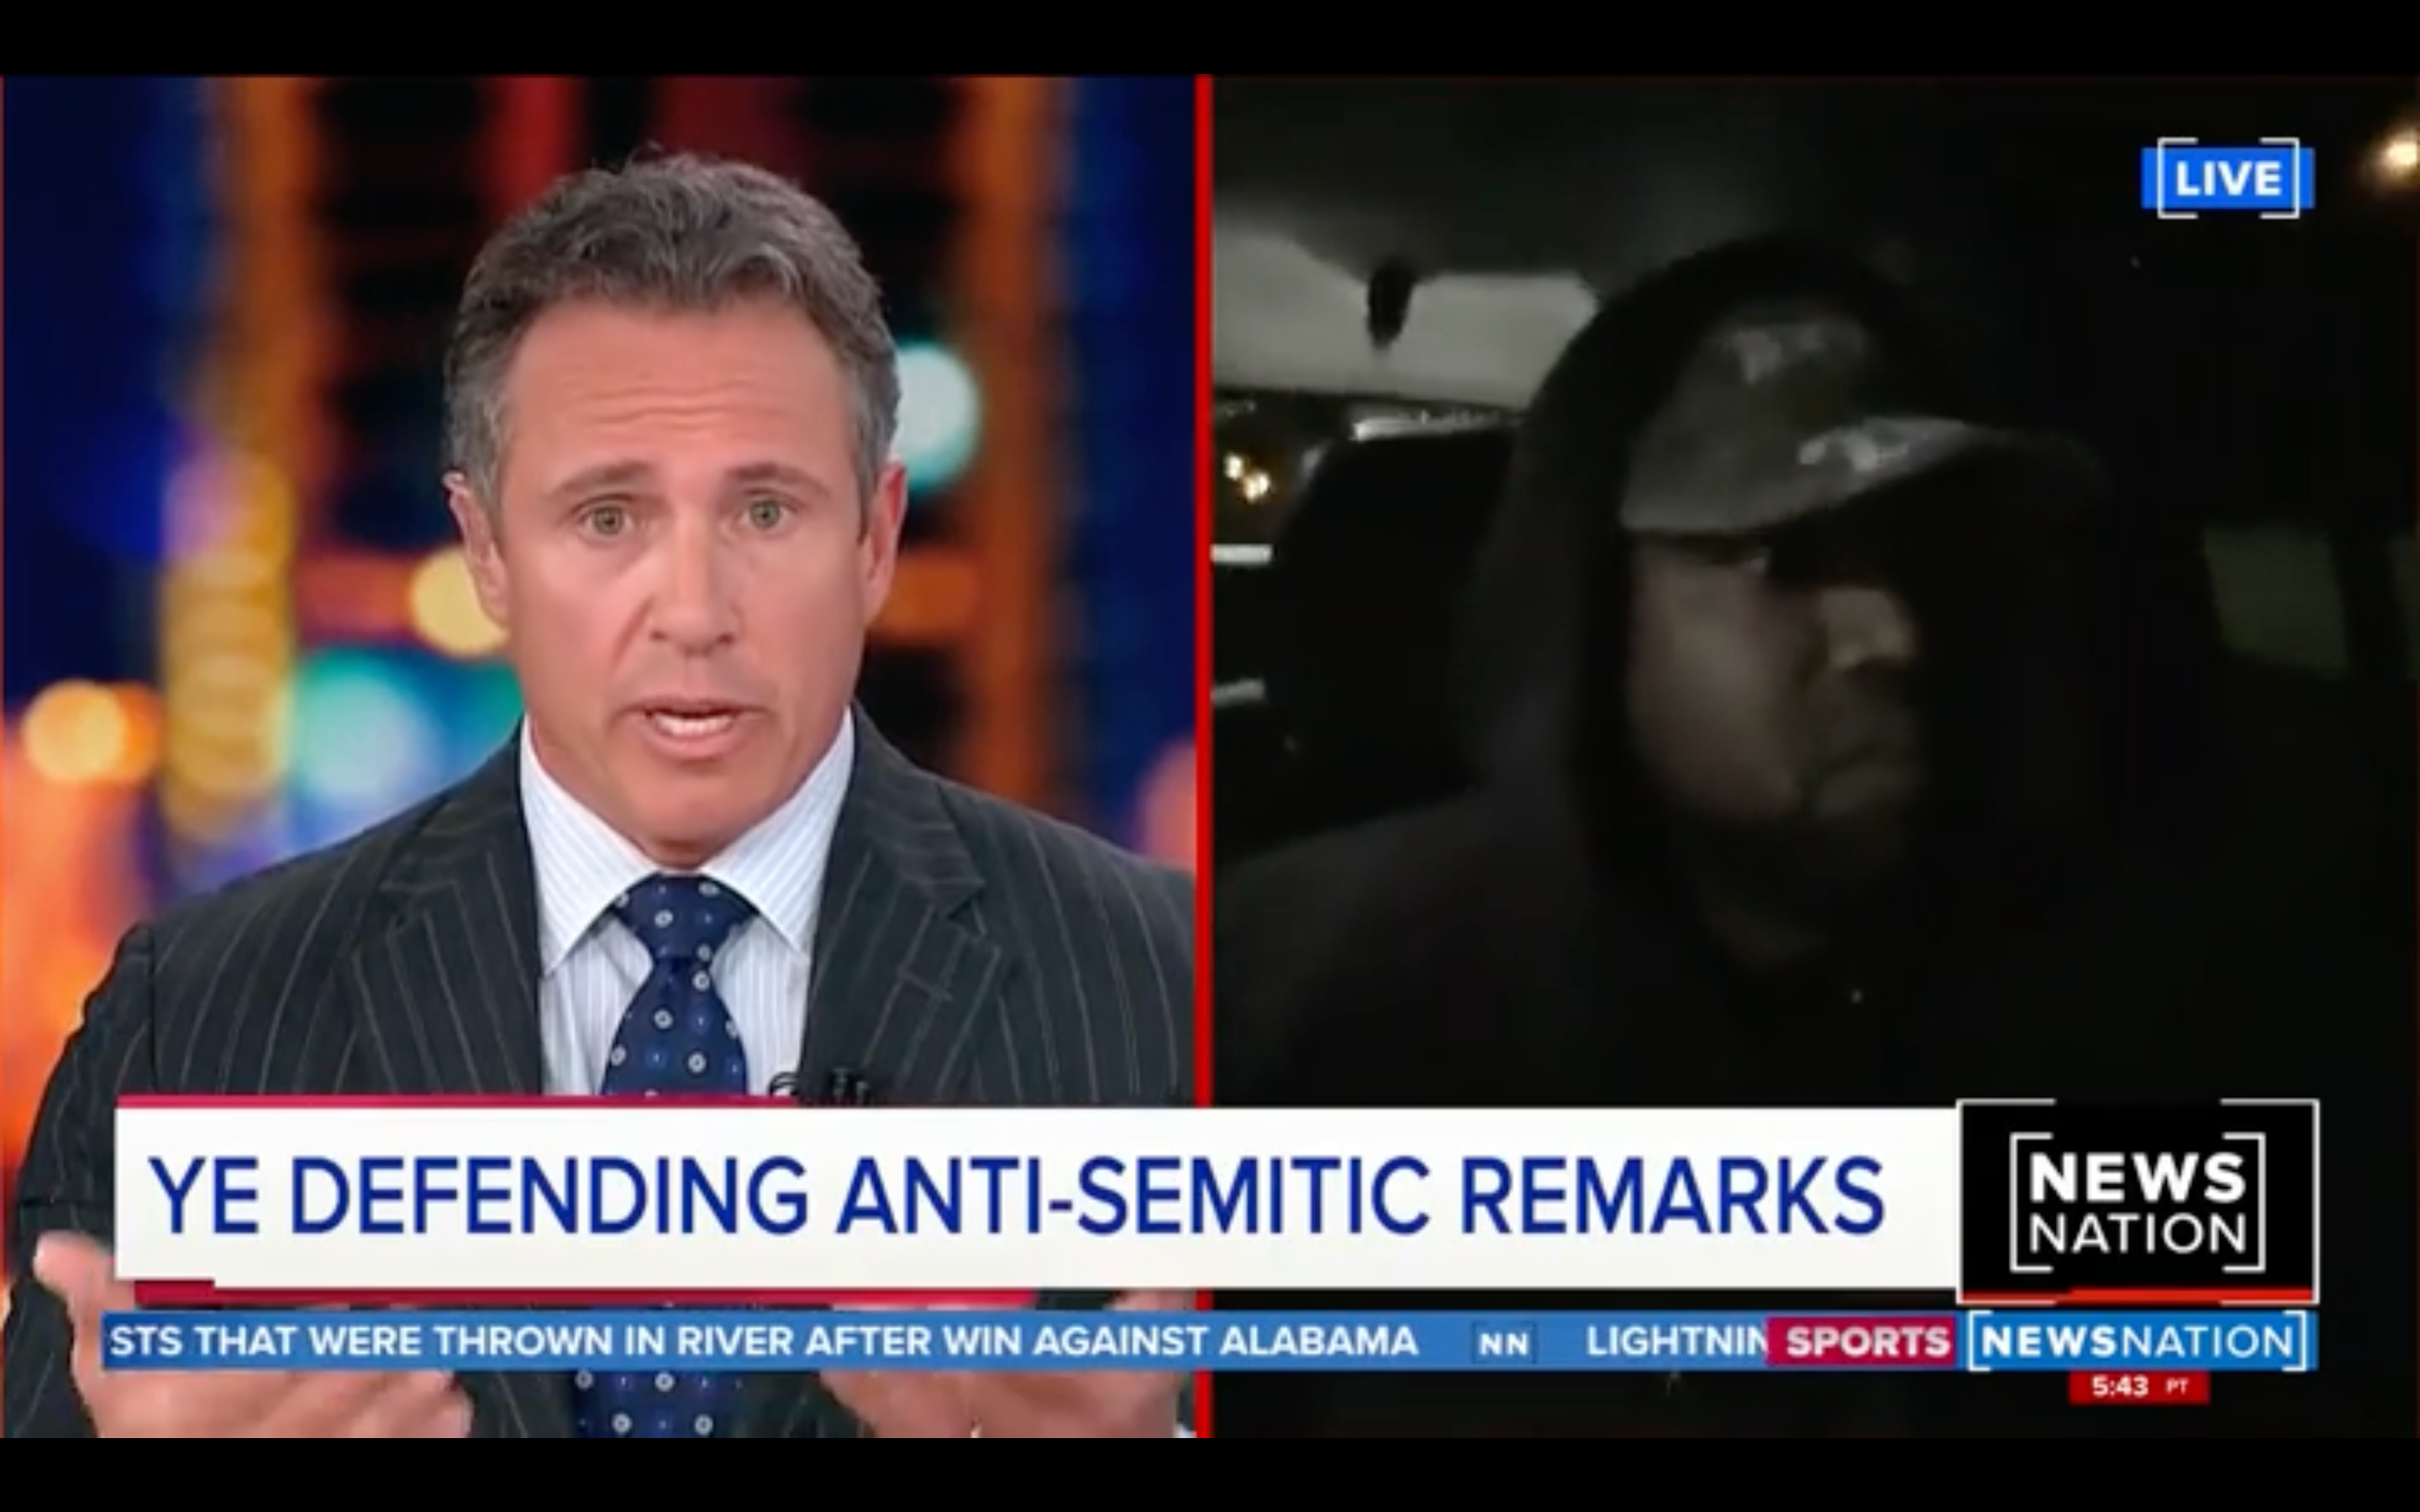 Chris Cuomo Shoots Down Kanye West's Racist Rant, 'That Is a Figment Of Your Imagination'